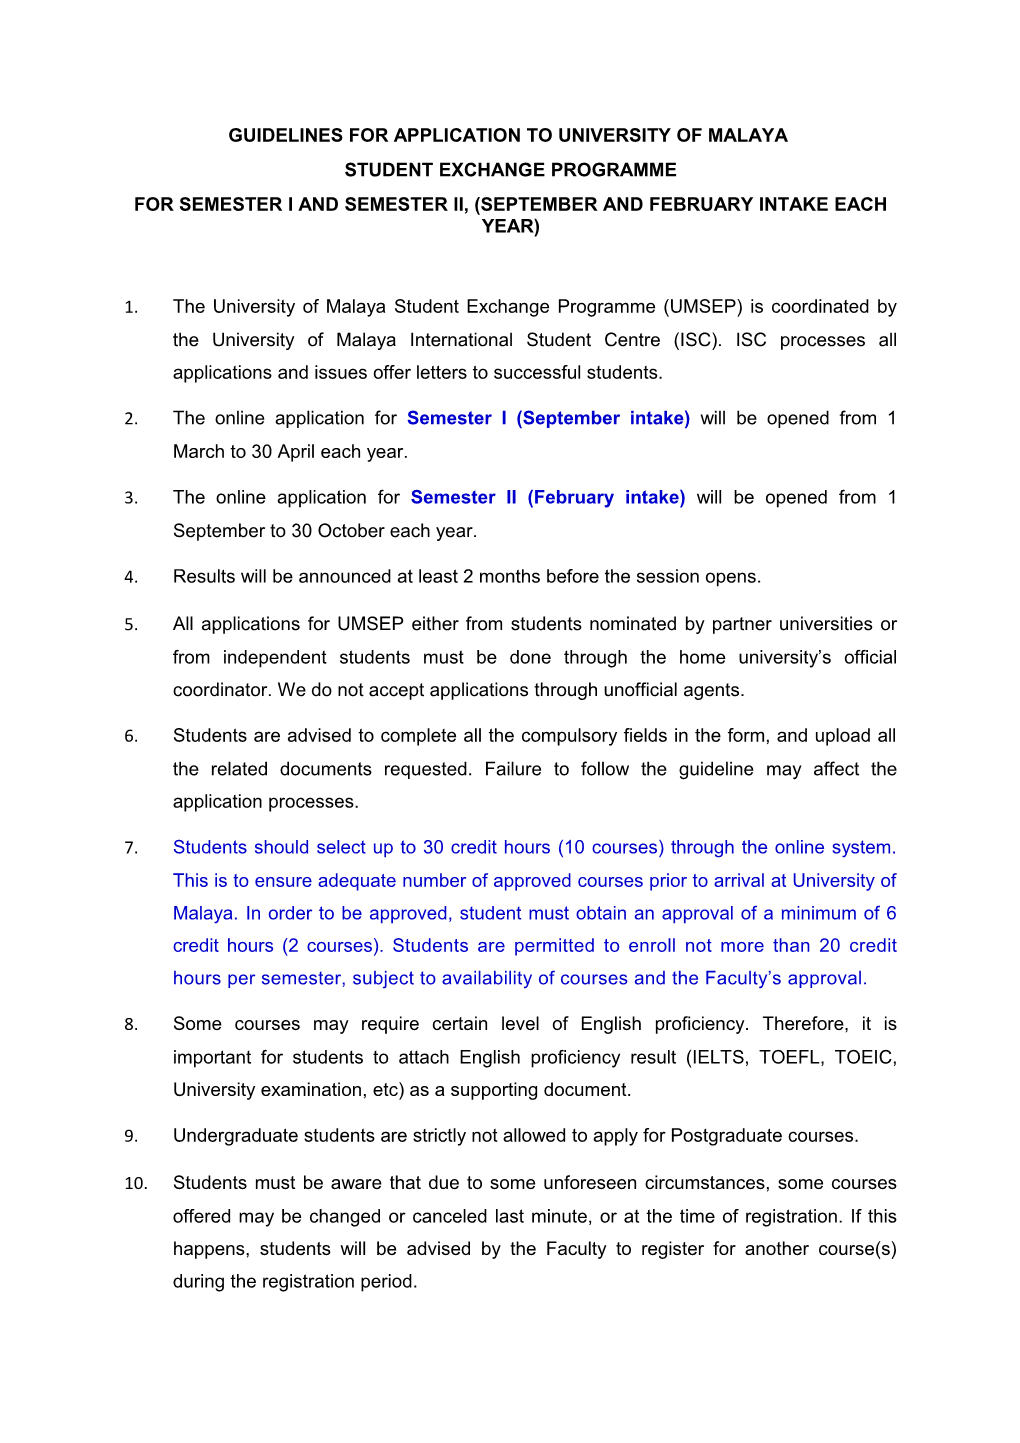 Guidelines for Application to University of Malaya